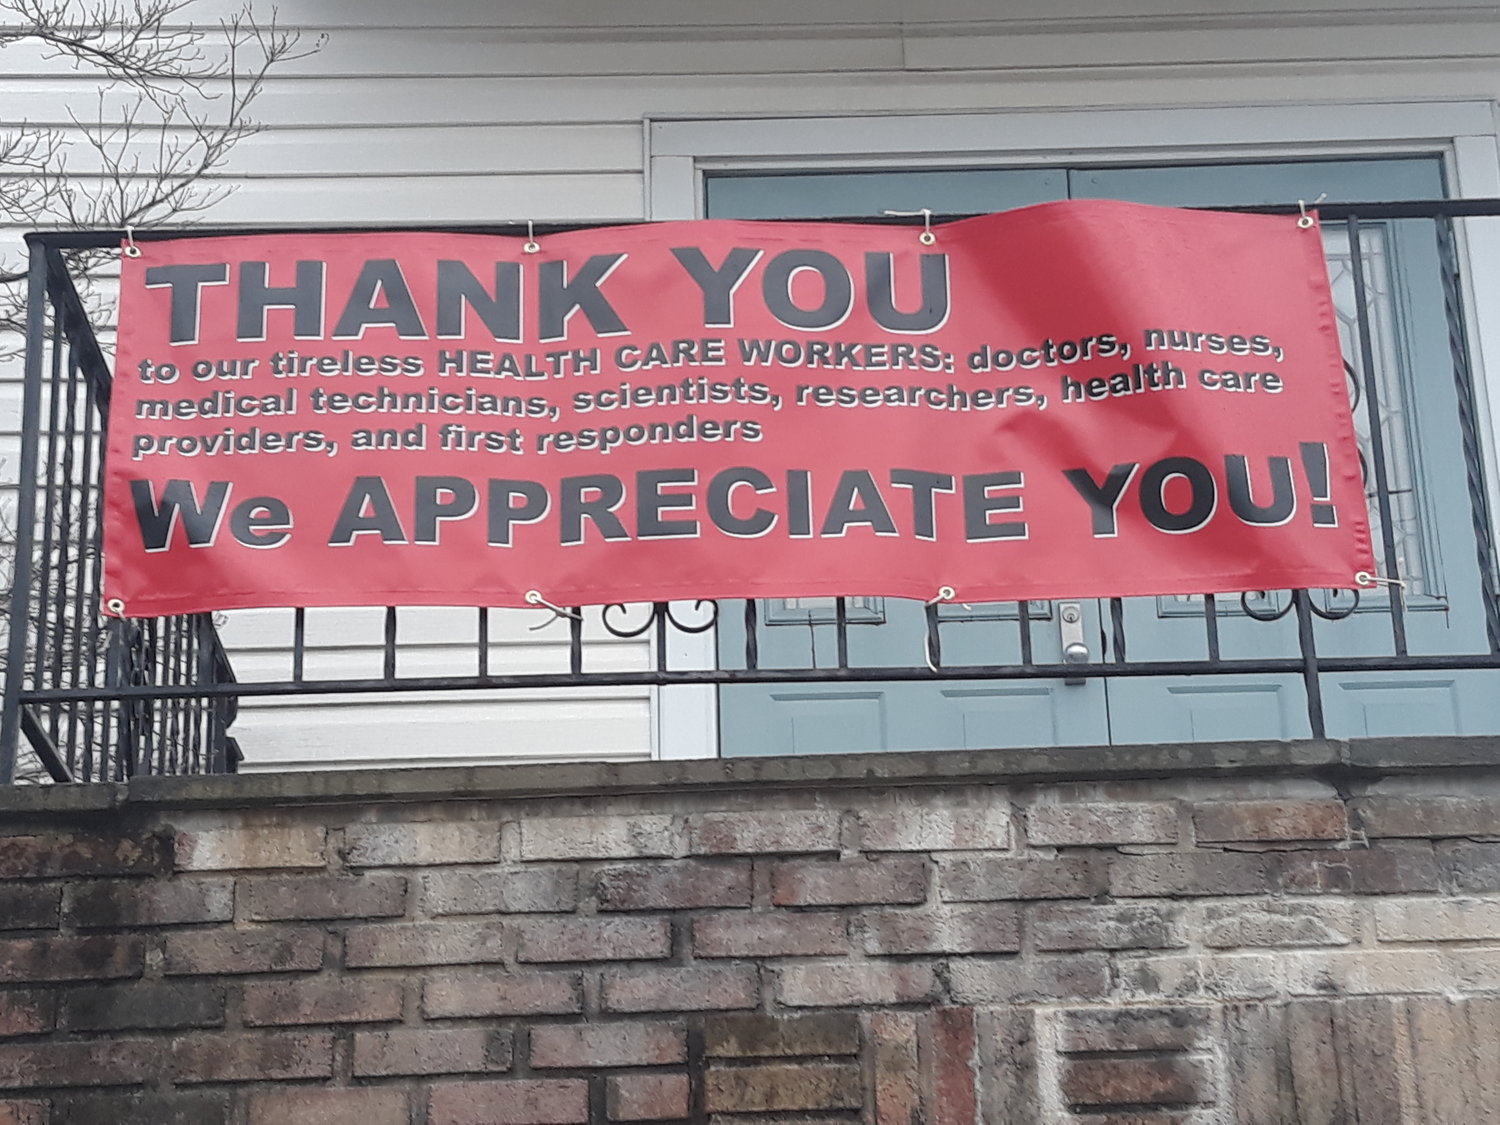 The religious leaders at St. John Lutheran Church in Bellmore hung a banner thanking health care workers.